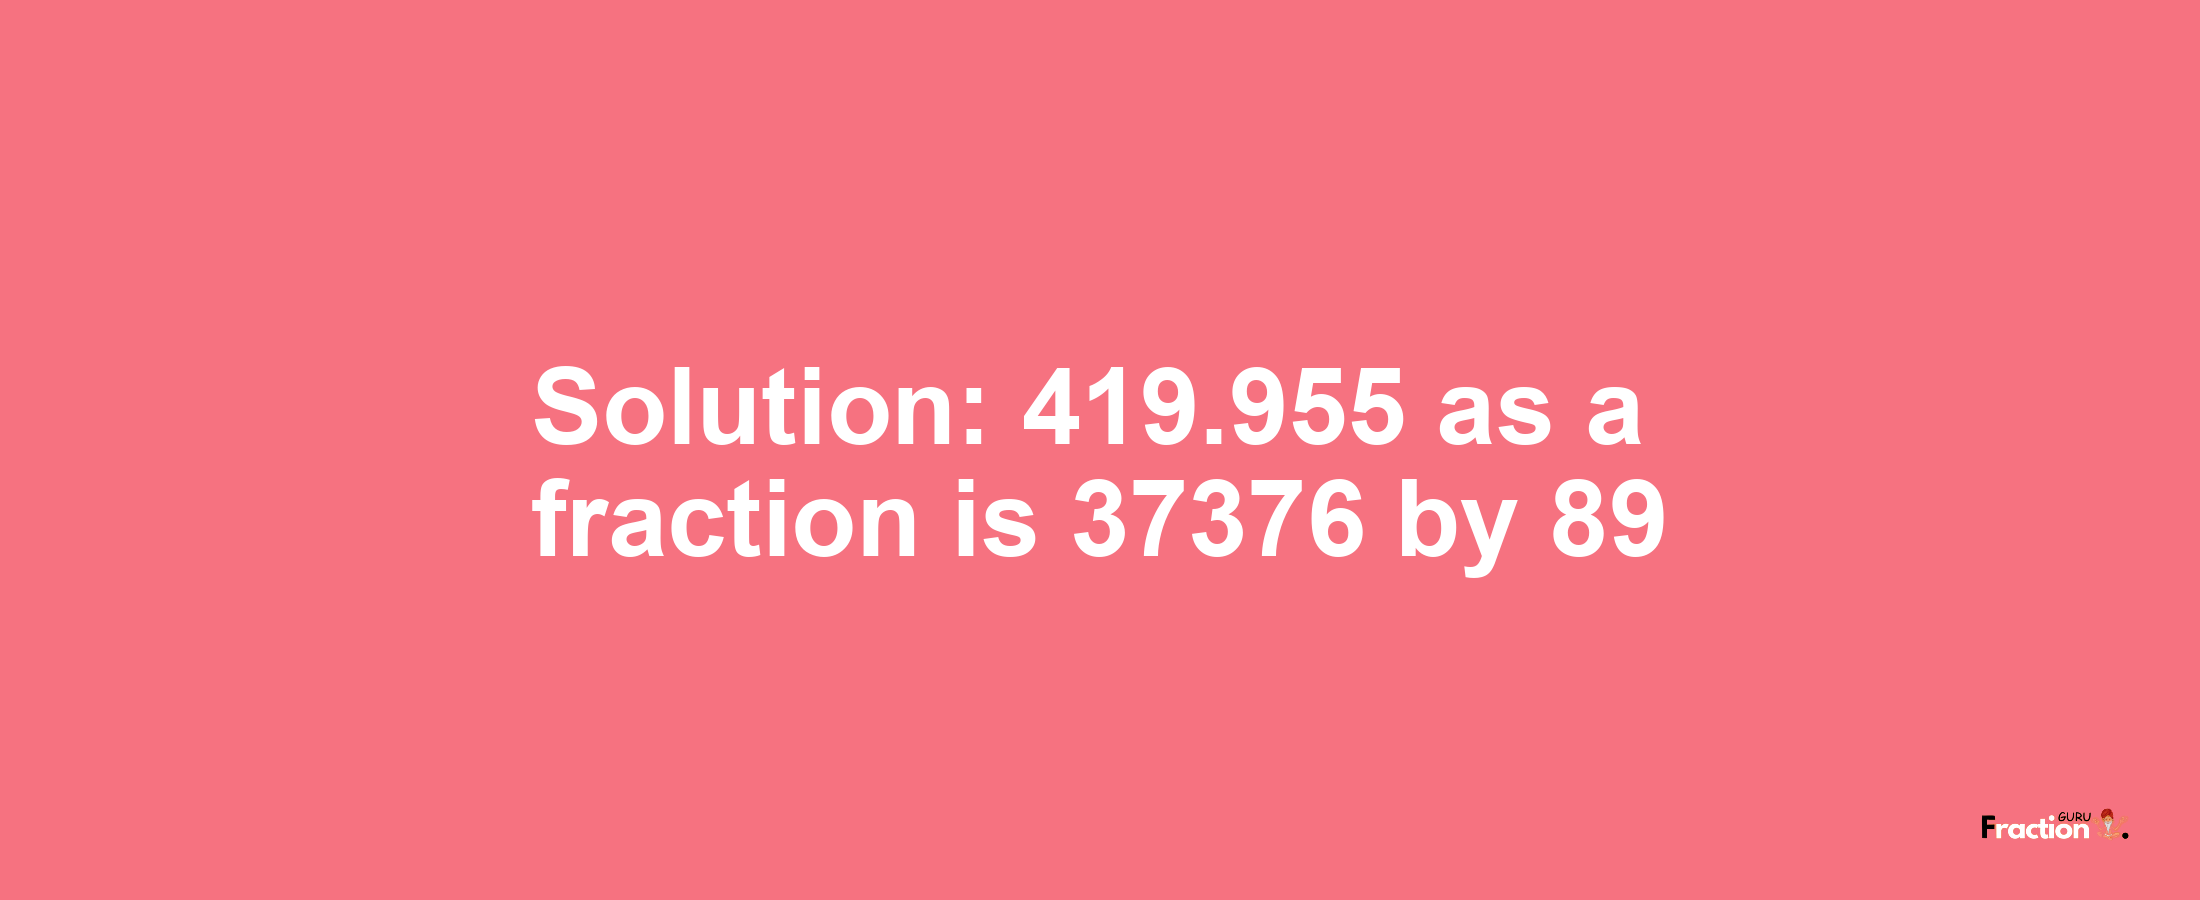 Solution:419.955 as a fraction is 37376/89